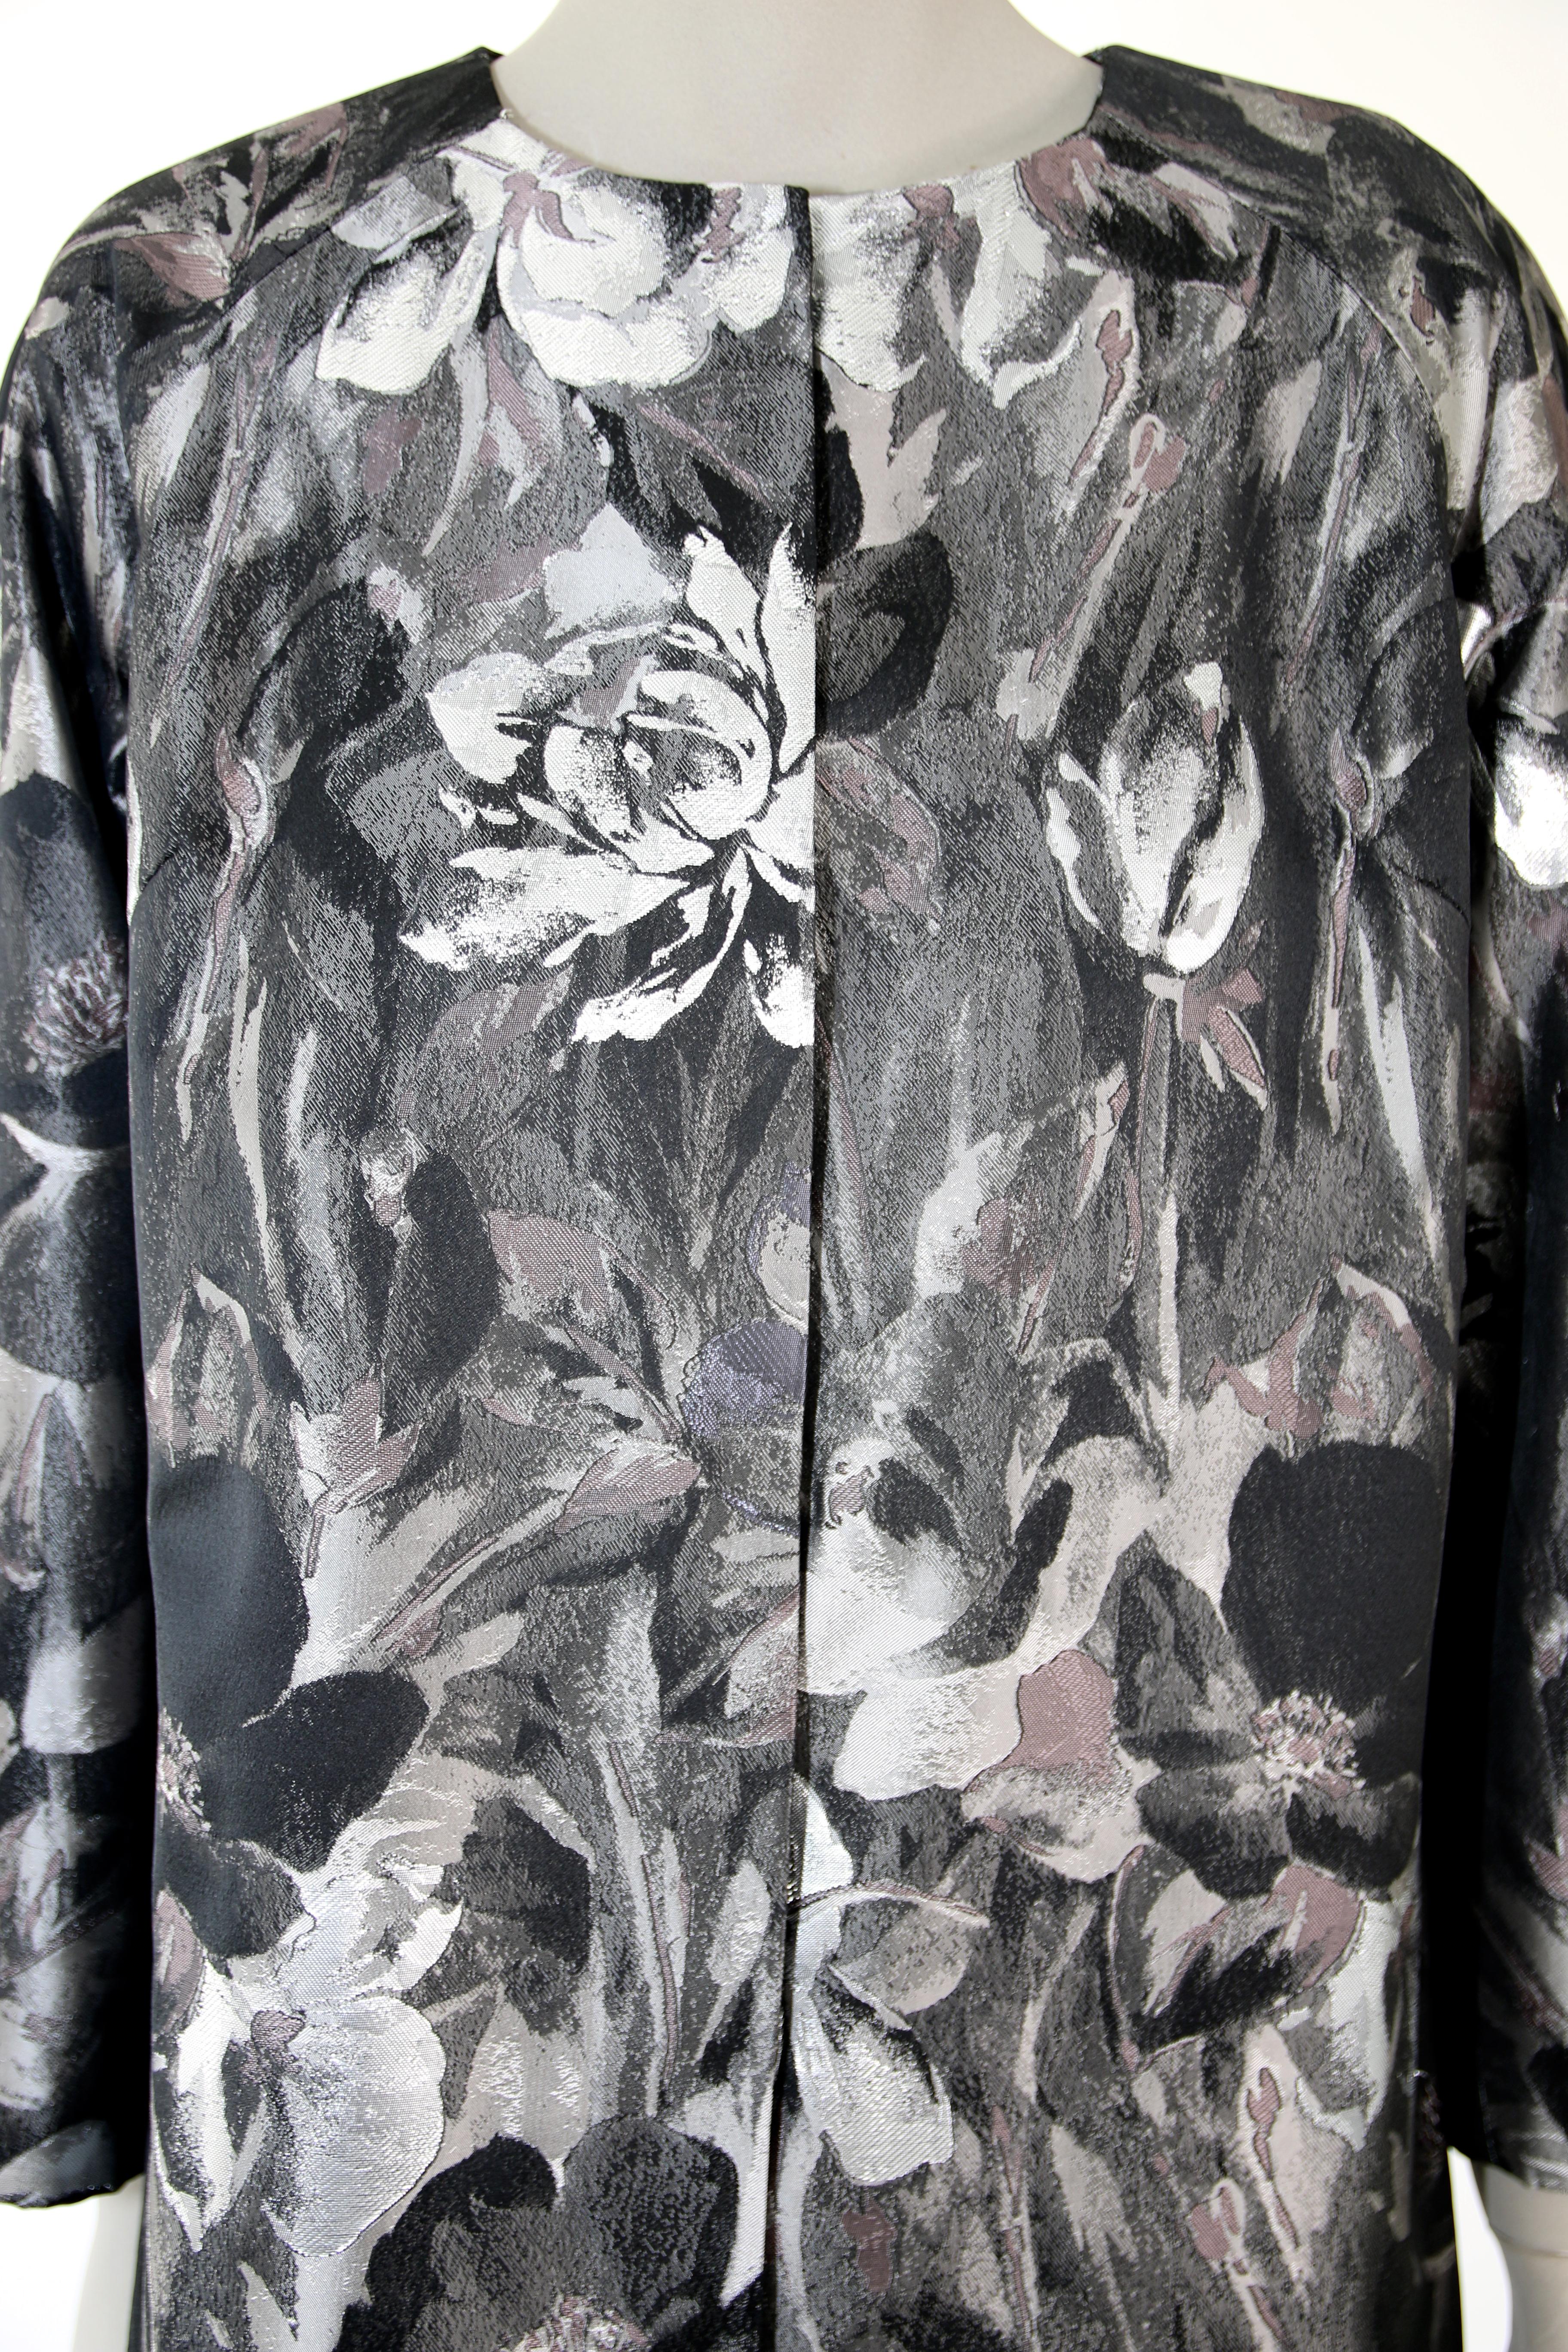 Pelush Black and Silver Brocade Printed Flower Coat - XS For Sale 4